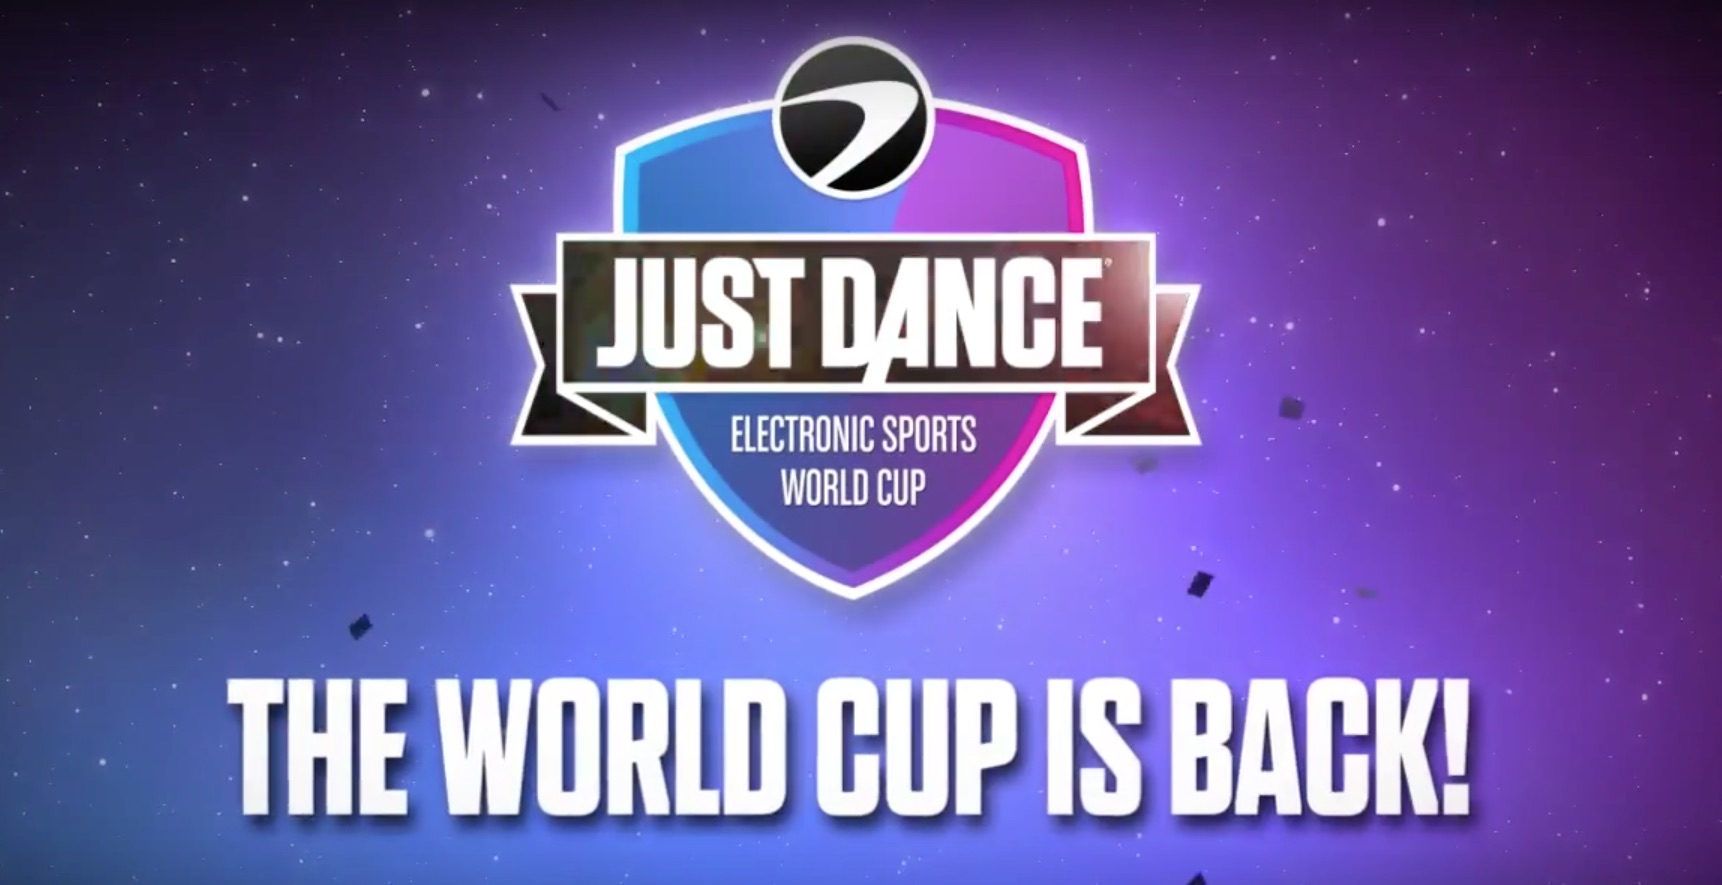 Just Dance - Ubisoft Electronic Sports World Cup (ESWC) 2015